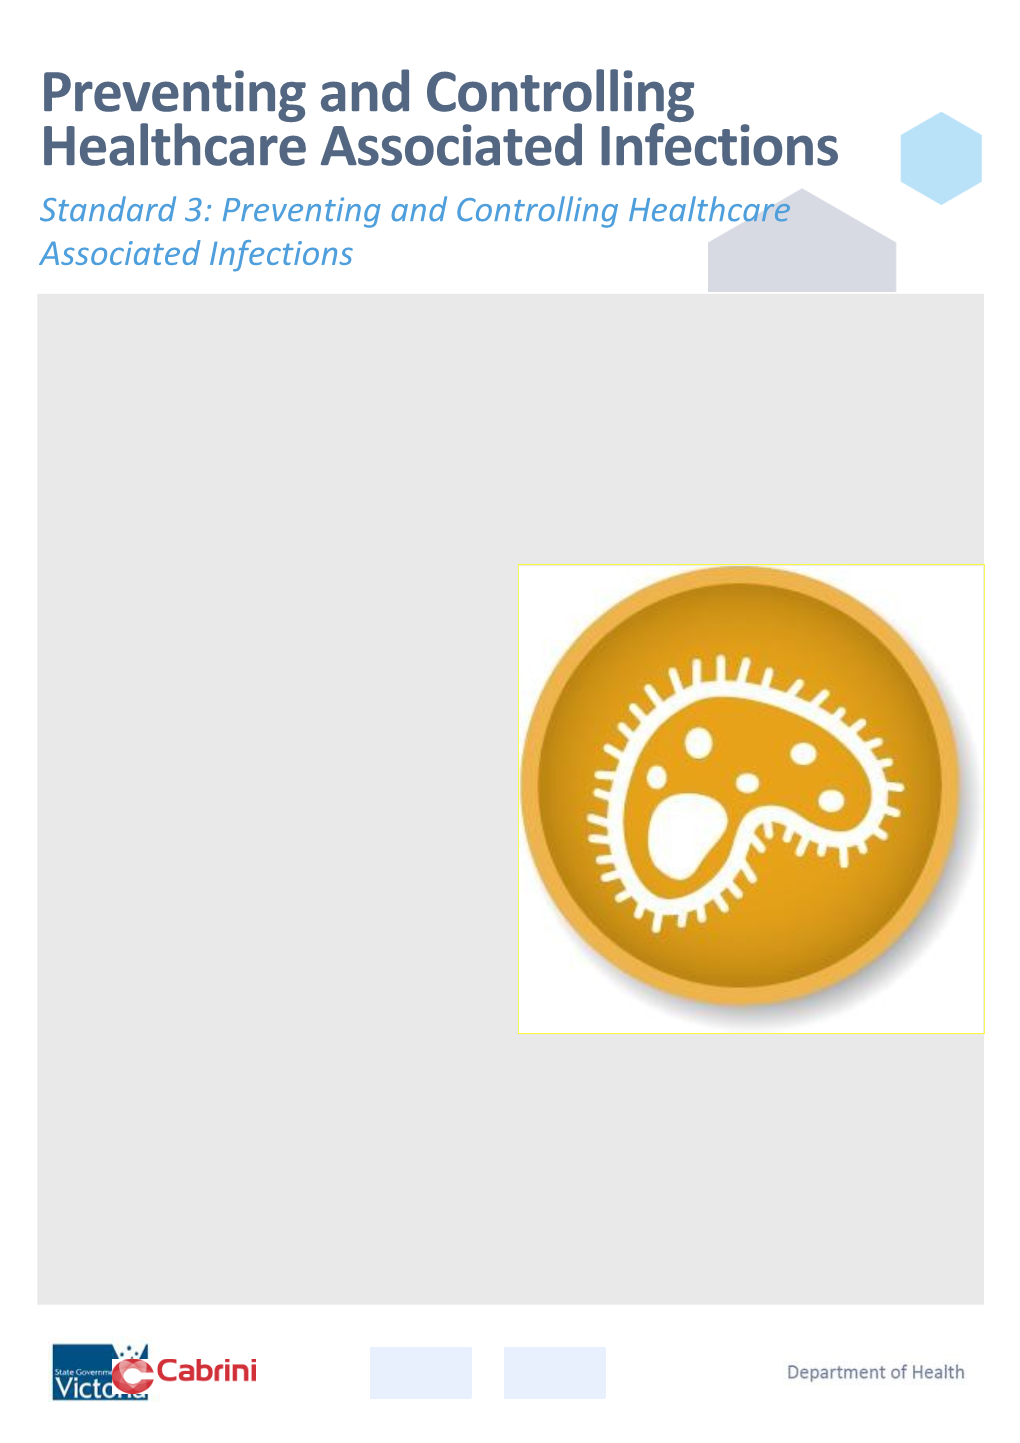 Preventing and Controlling Healthcare Associated Infections